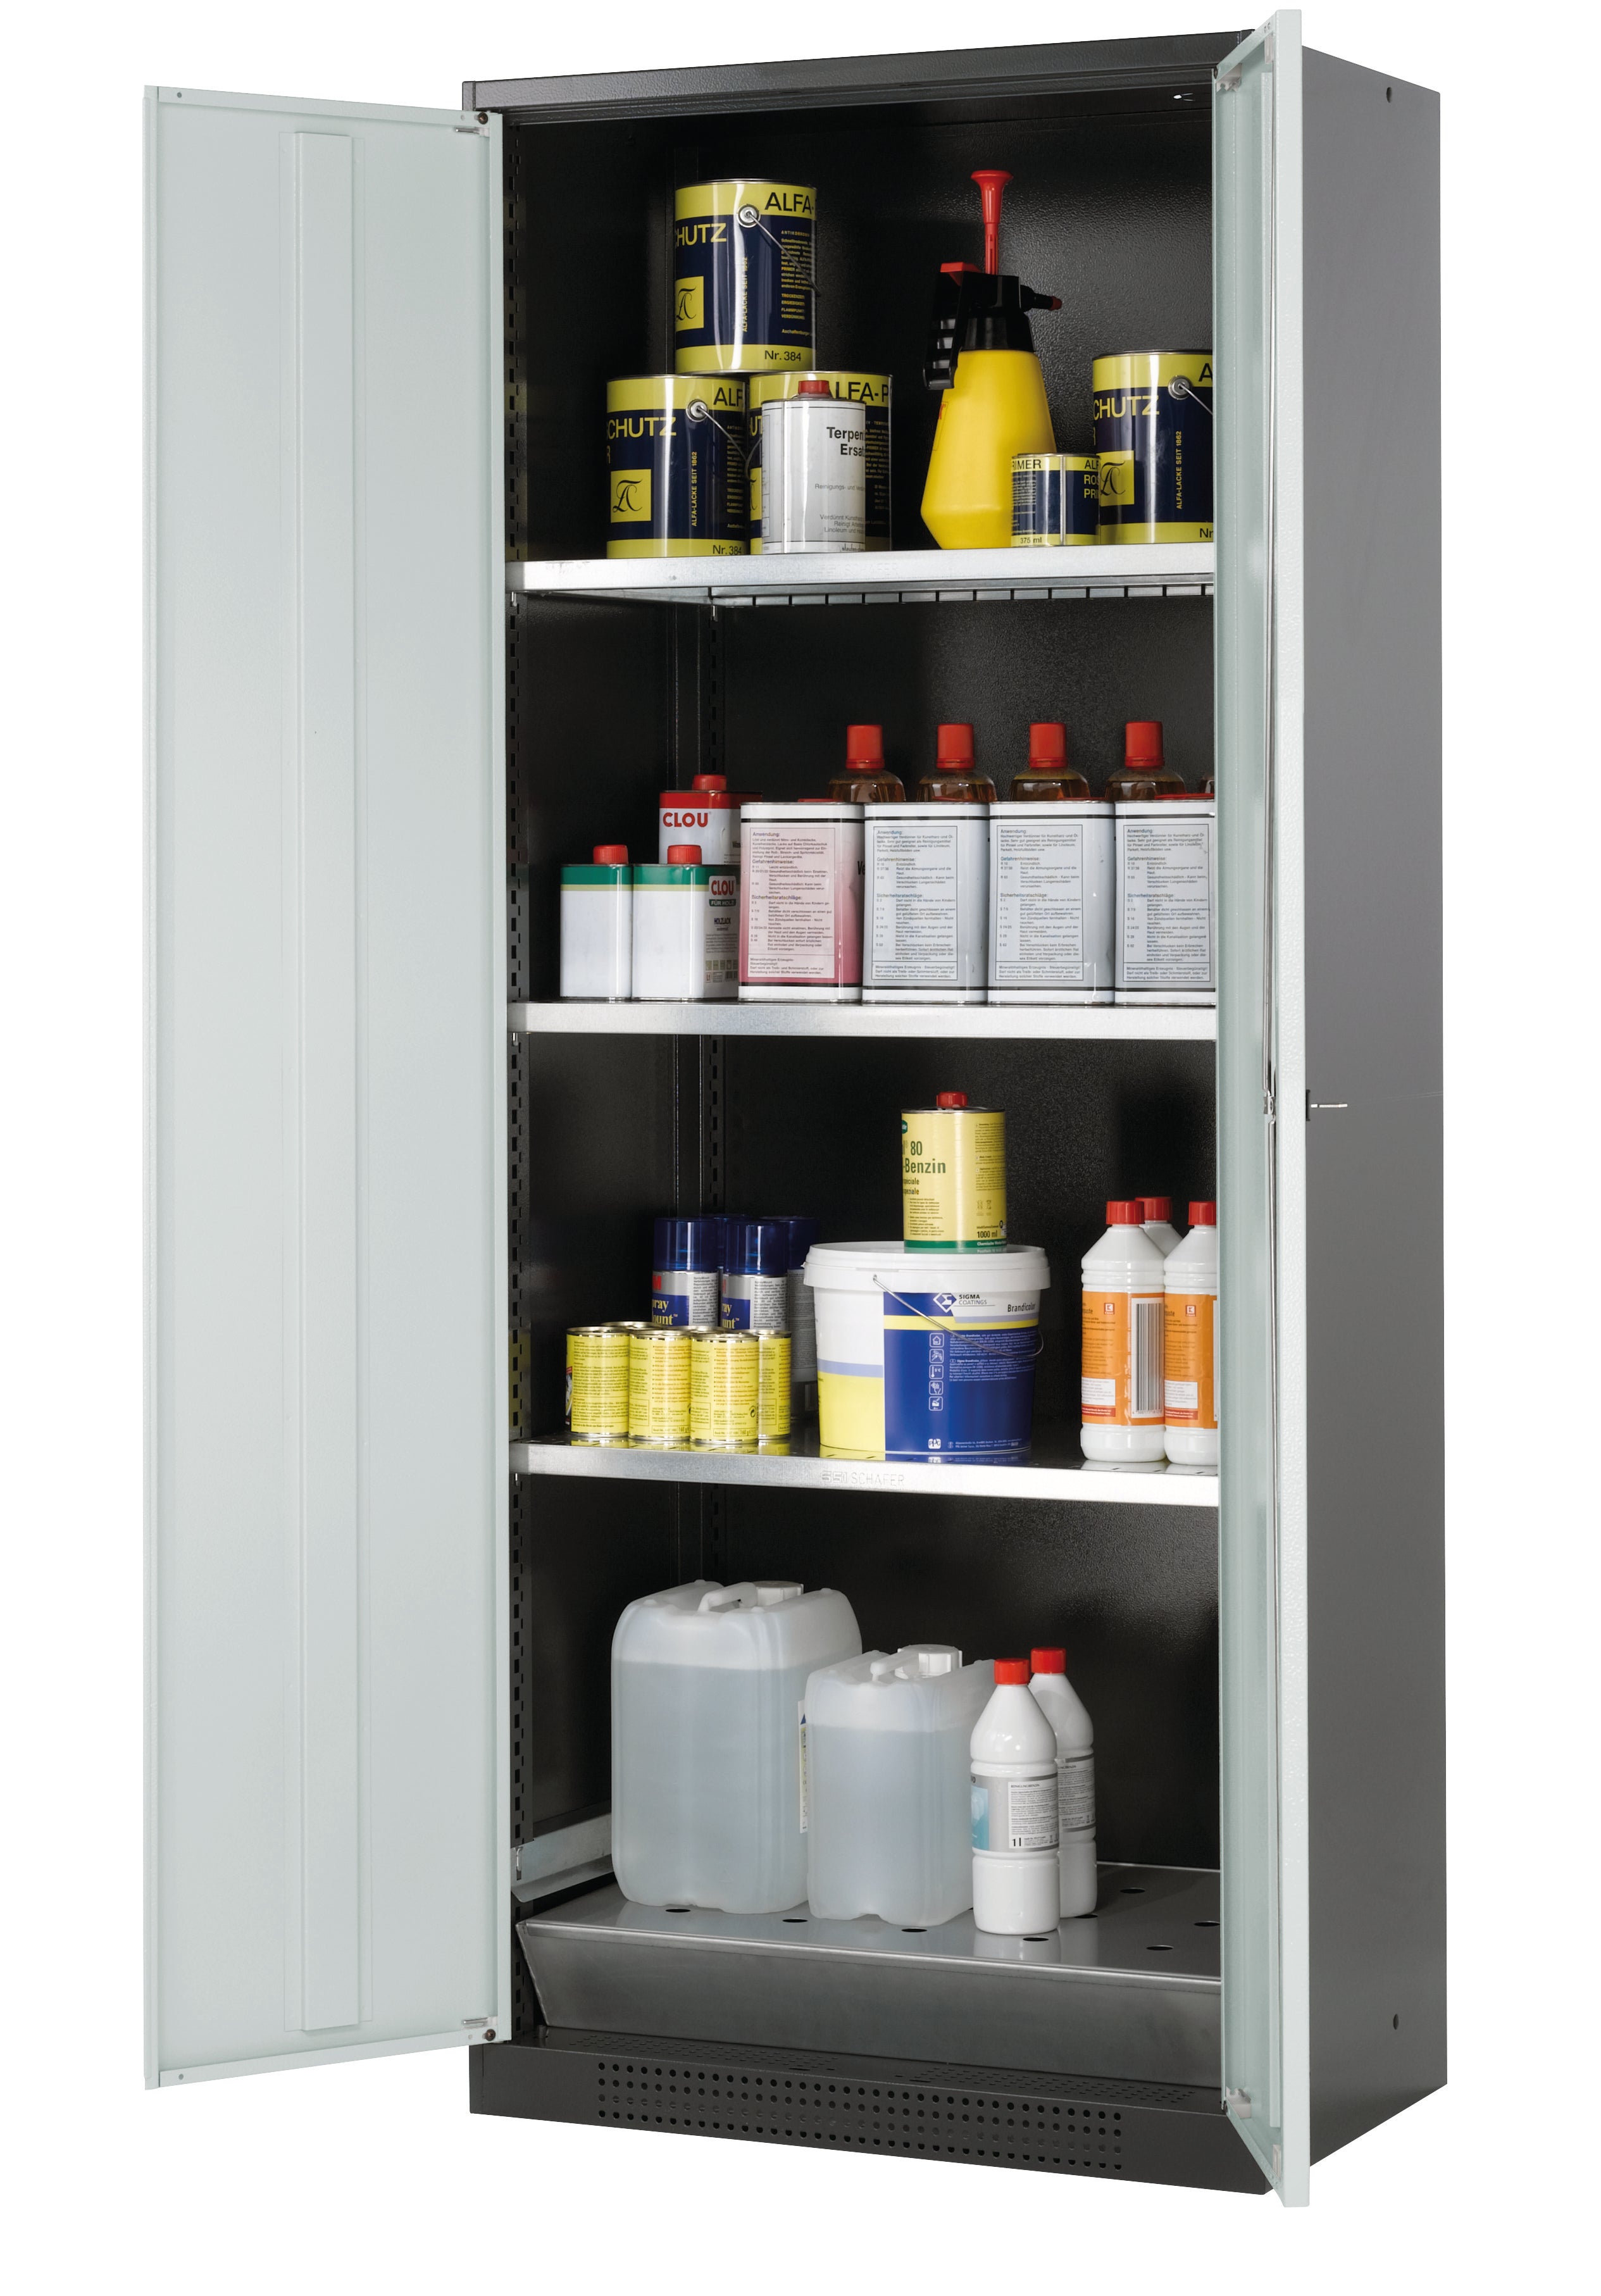 Chemical cabinet CS-CLASSIC model CS.195.081 in light gray RAL 7035 with 3x standard shelves (sheet steel)